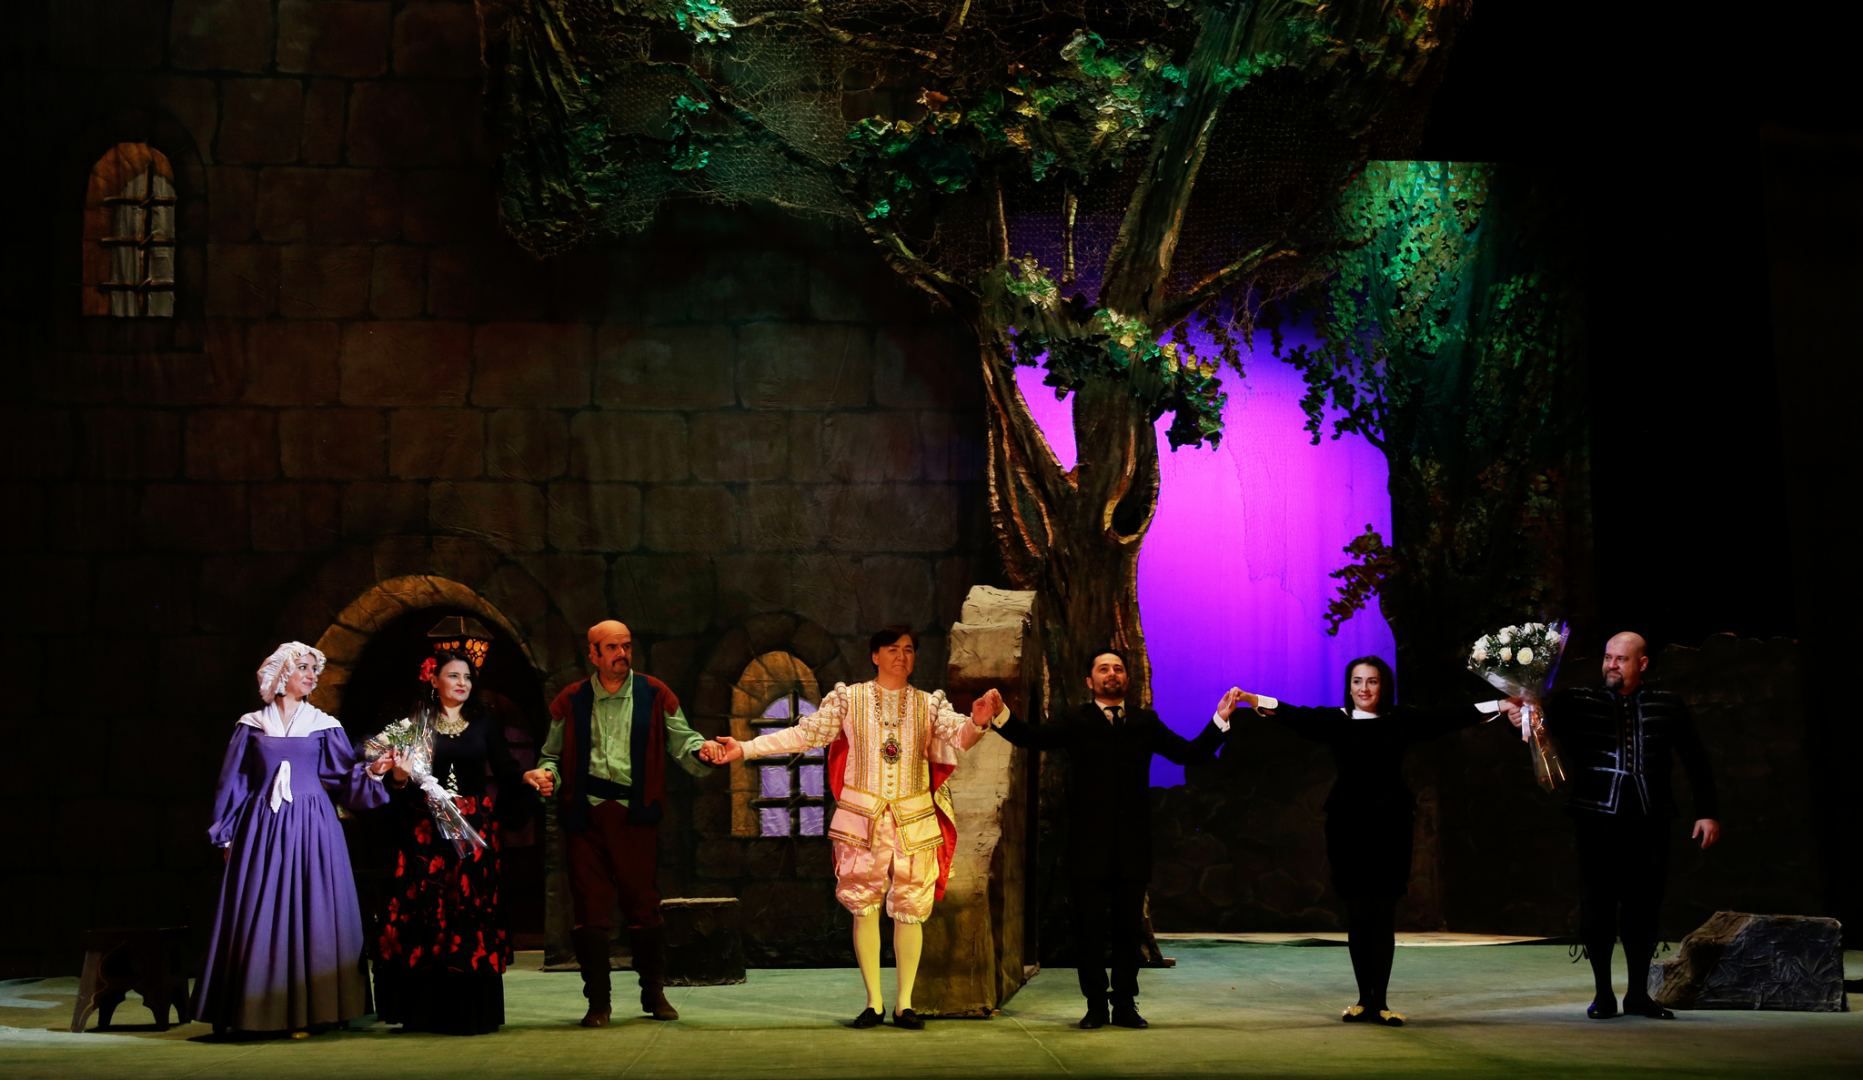 Giuseppe Verdi's work awes and enraptures opera lovers [PHOTO]